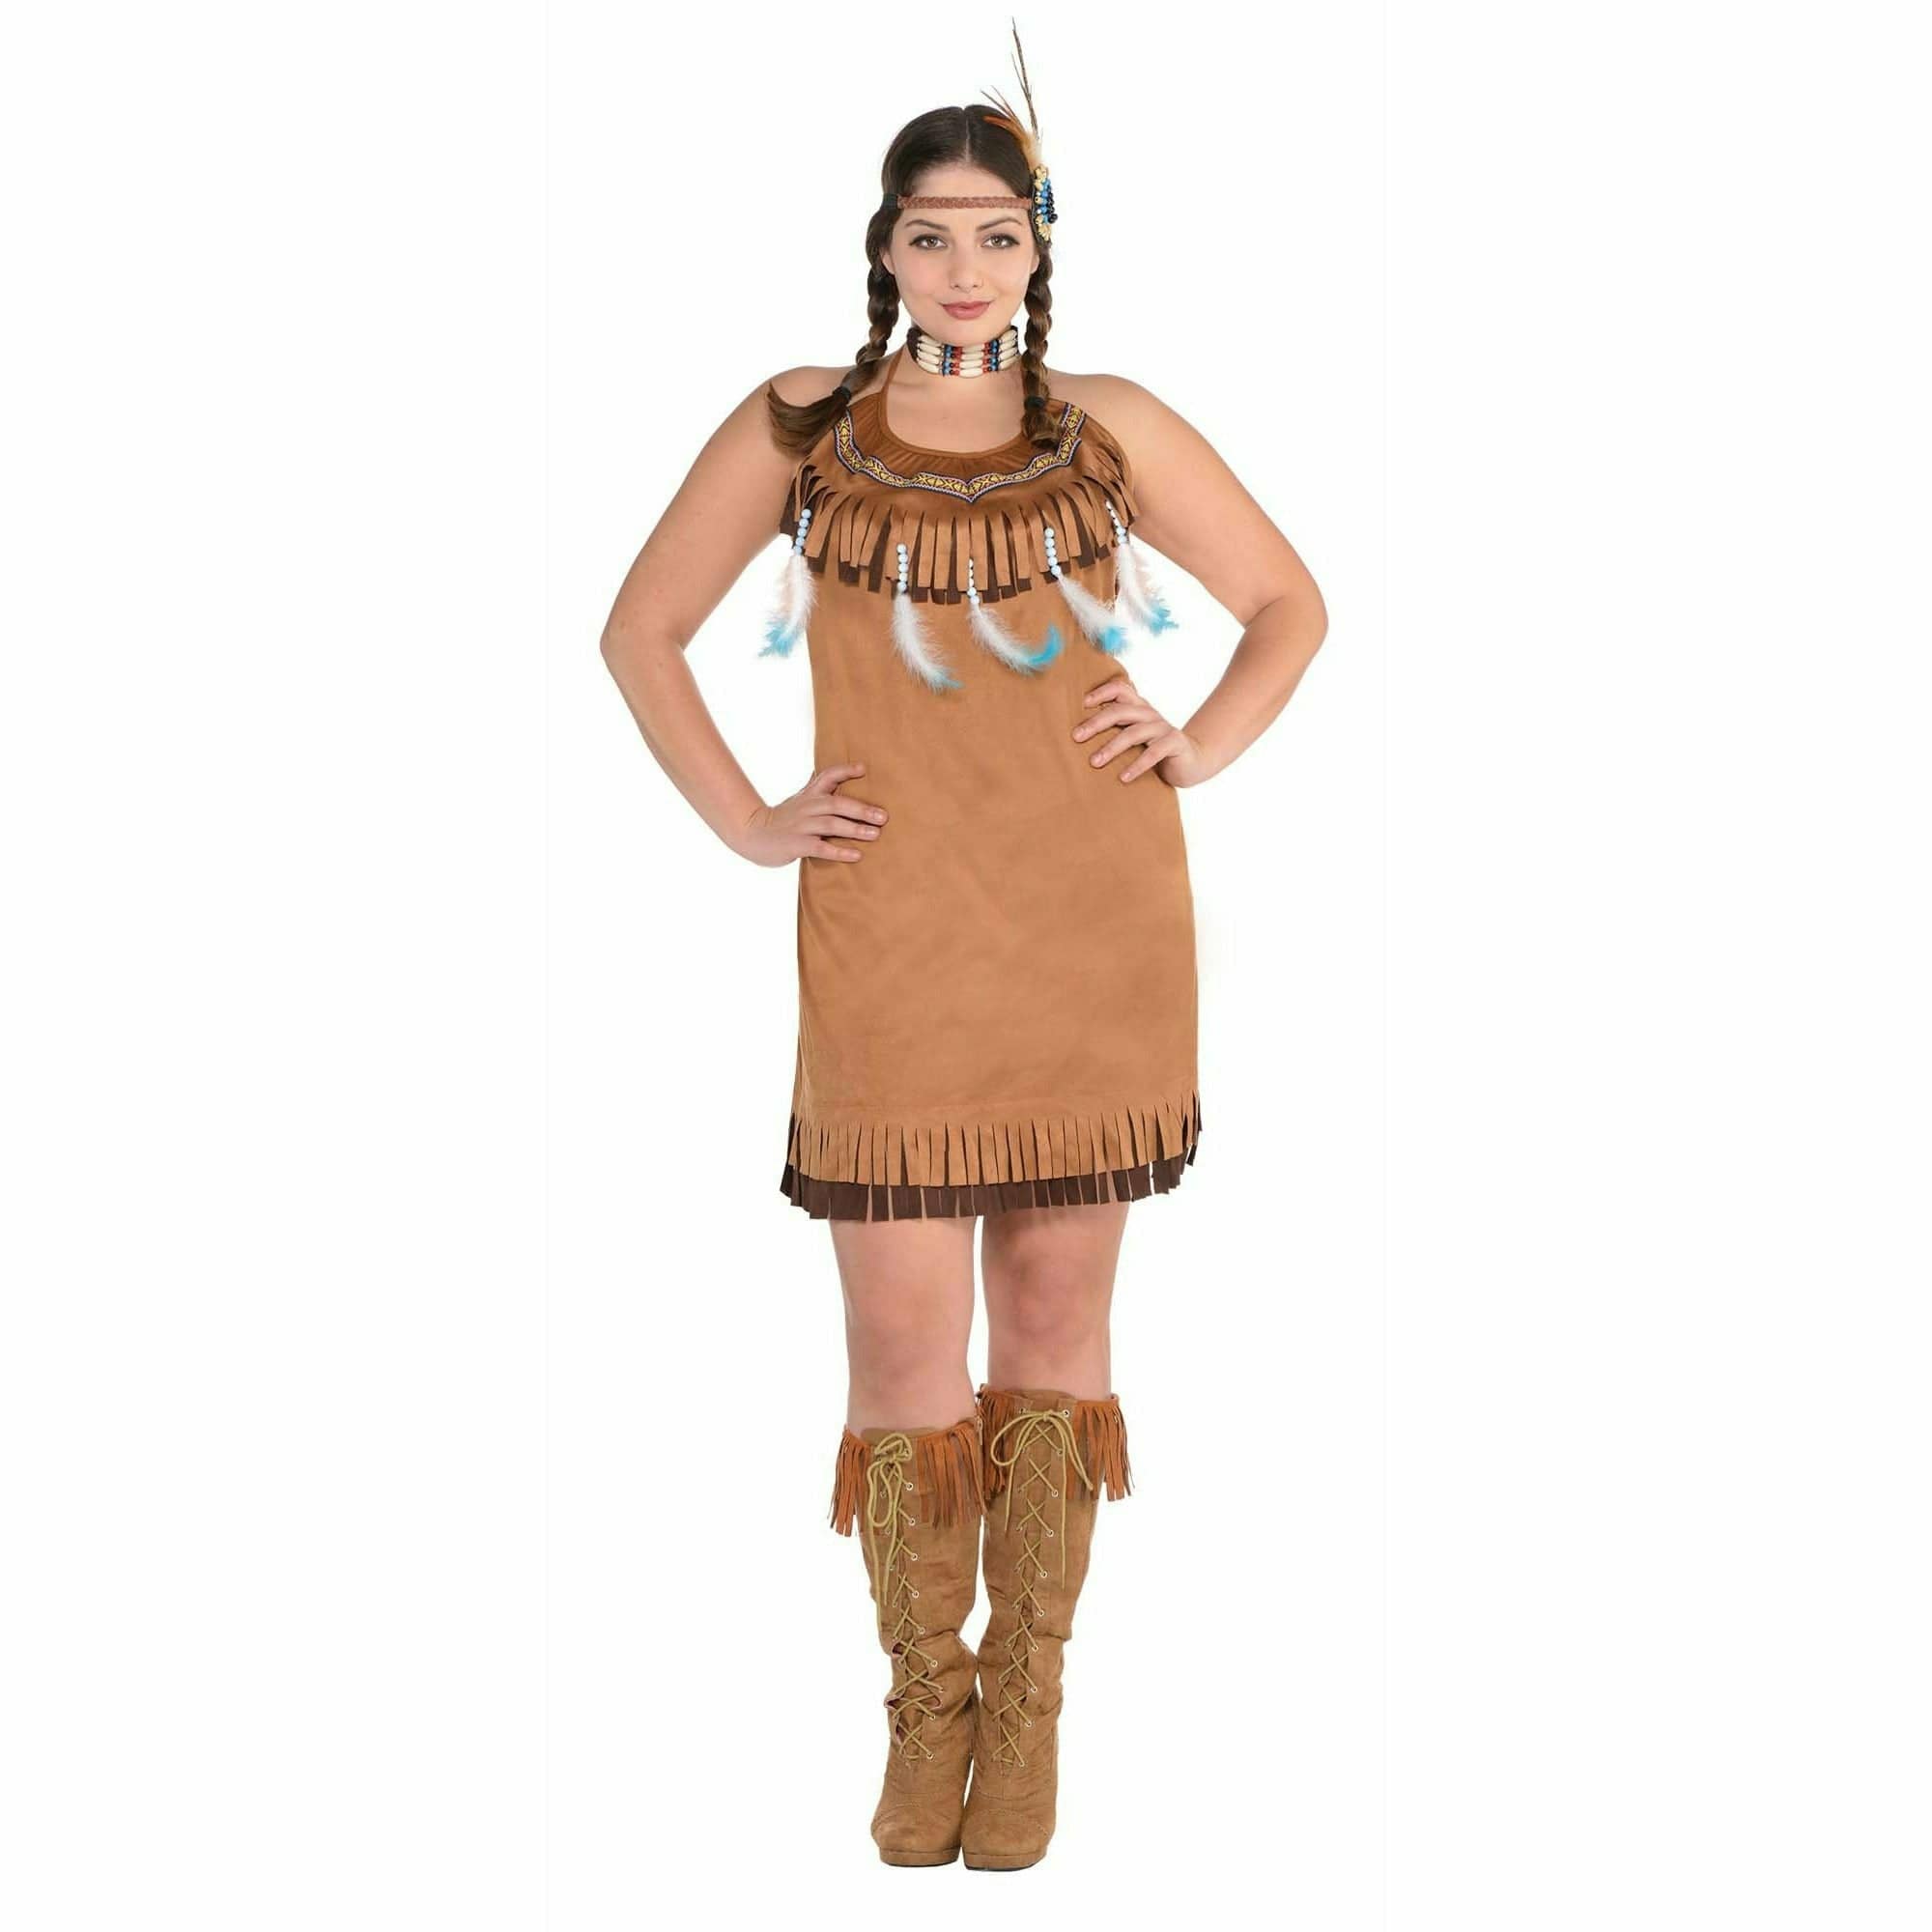 Amscan COSTUMES Adult Plus XXL 18-20 Womens West Fringed Adult Dress